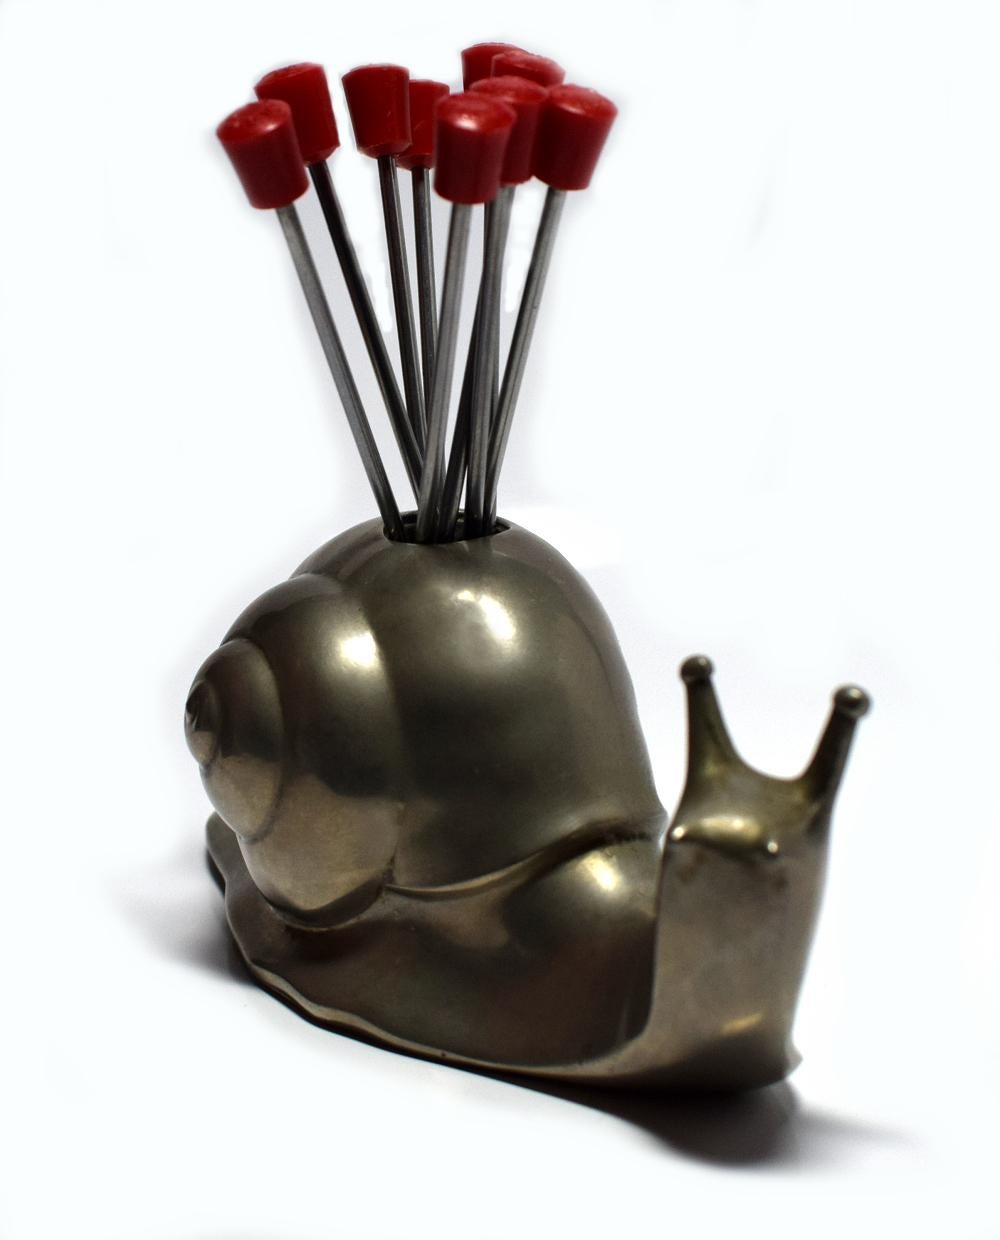 1930s French Art Deco novelty cocktail stick holder in the form of a large snail with nine red bakelite and chrome cocktail sticks. The condition throughout is excellent.